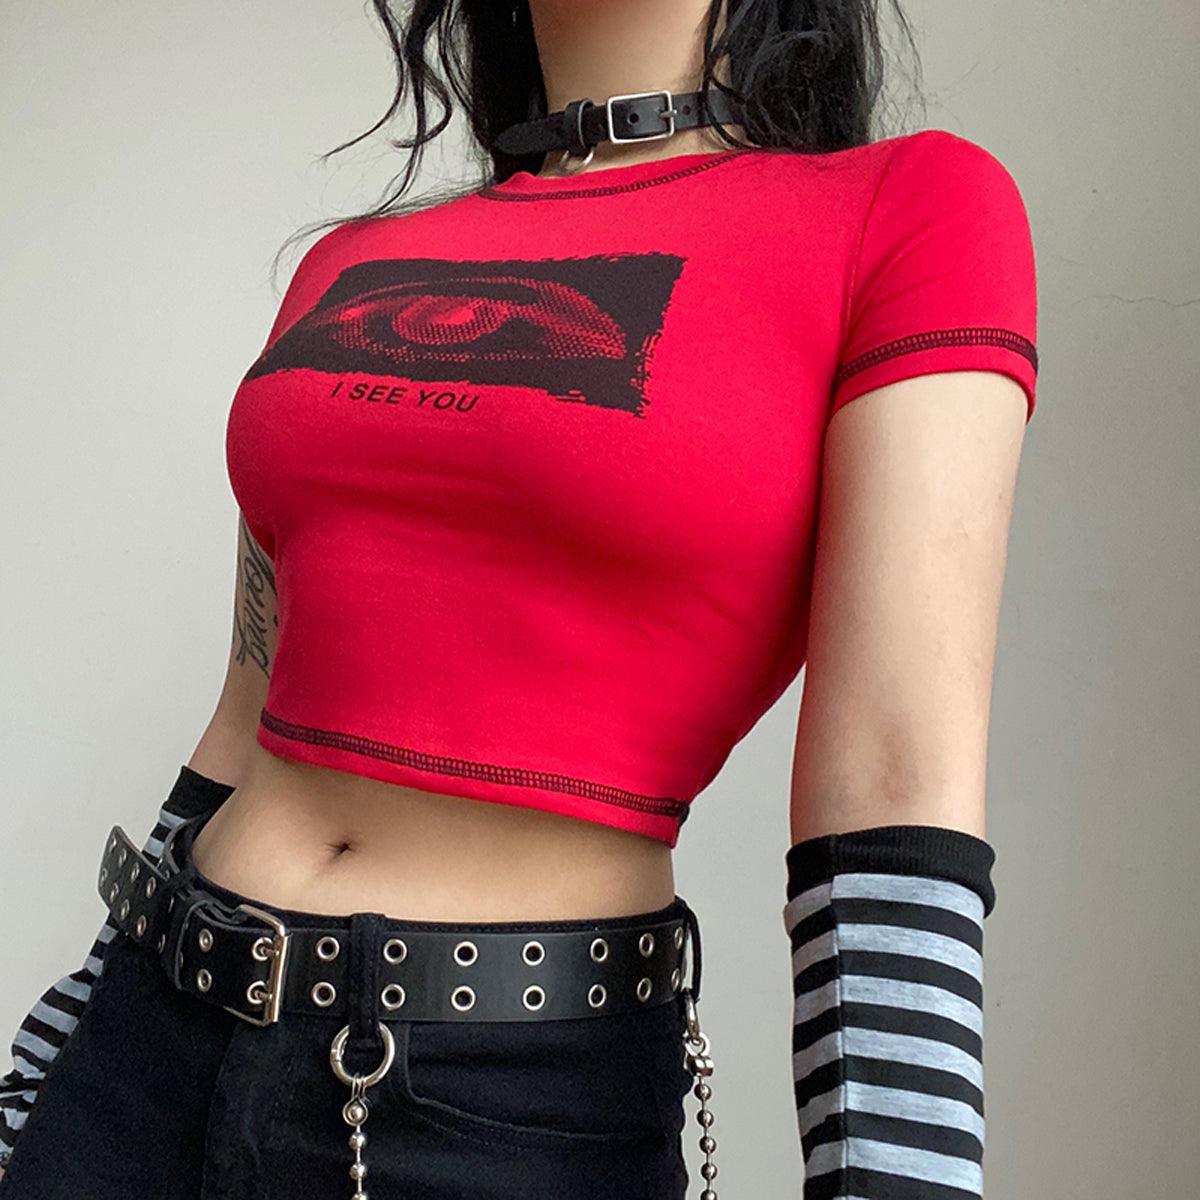 I See You Red Crop Top and Sleeves - Aesthetic Clothes Shop